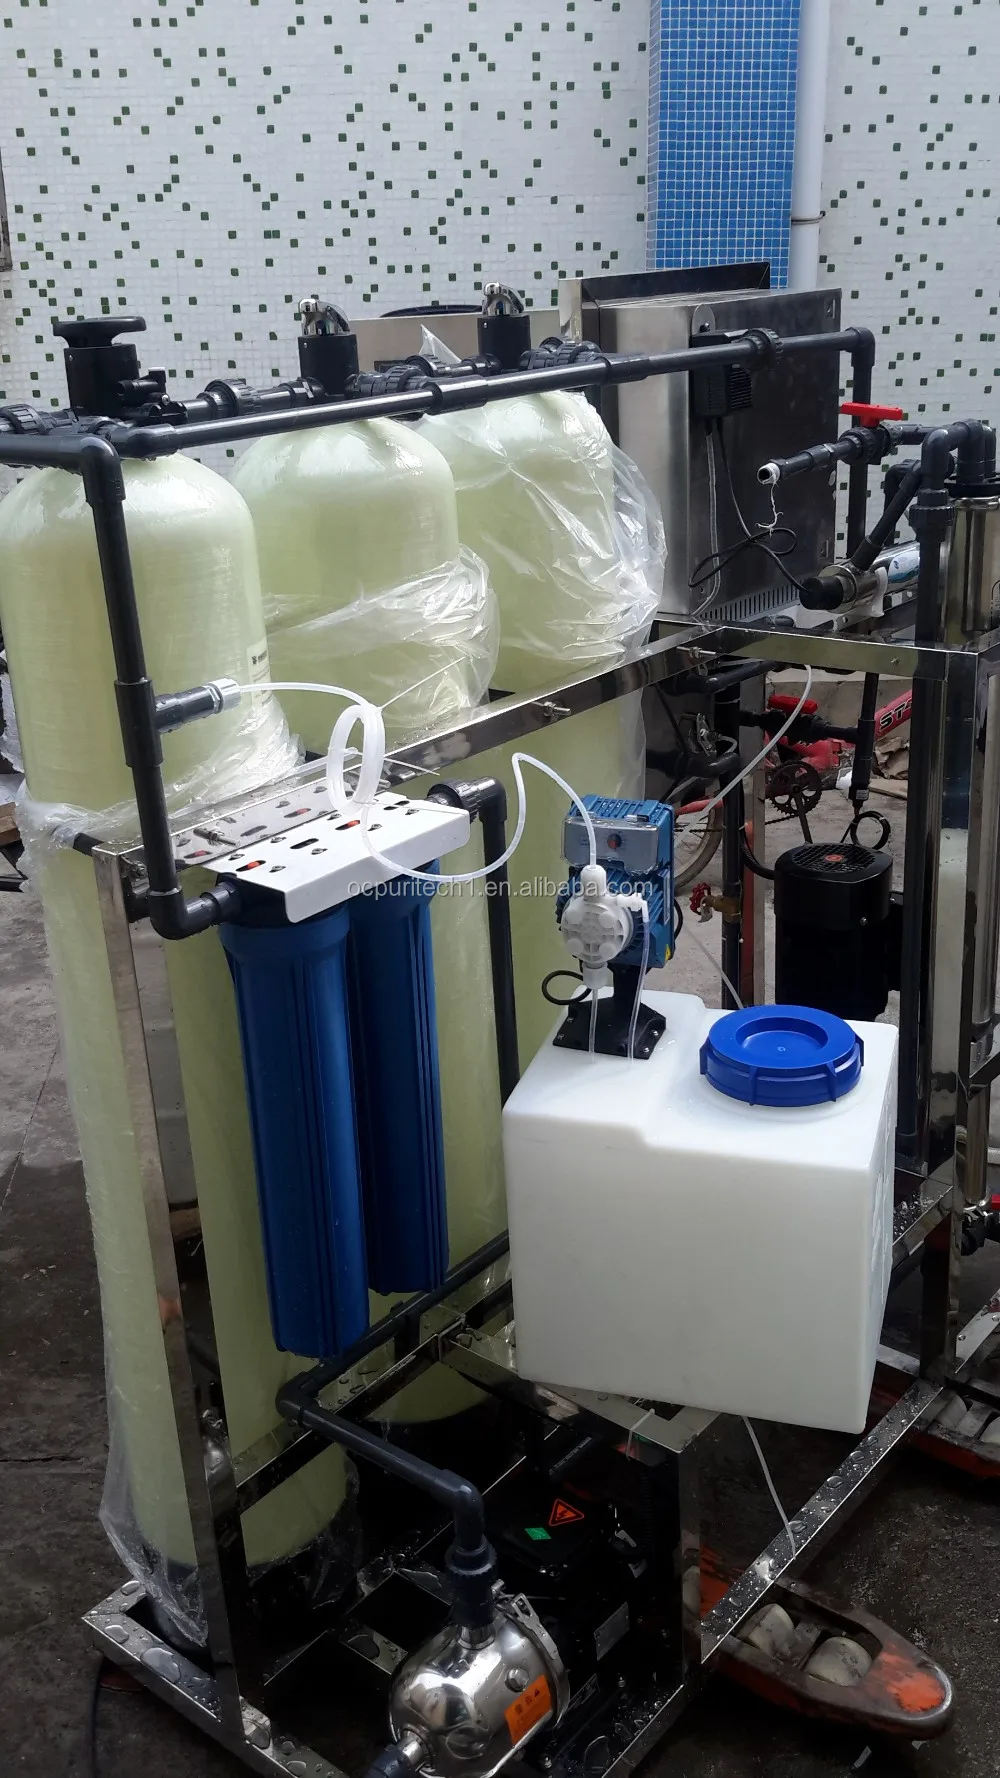 Low price 250lph (1500gpd) reverse osmosis(ro) water purification system for BOREHOLE salty water desalination